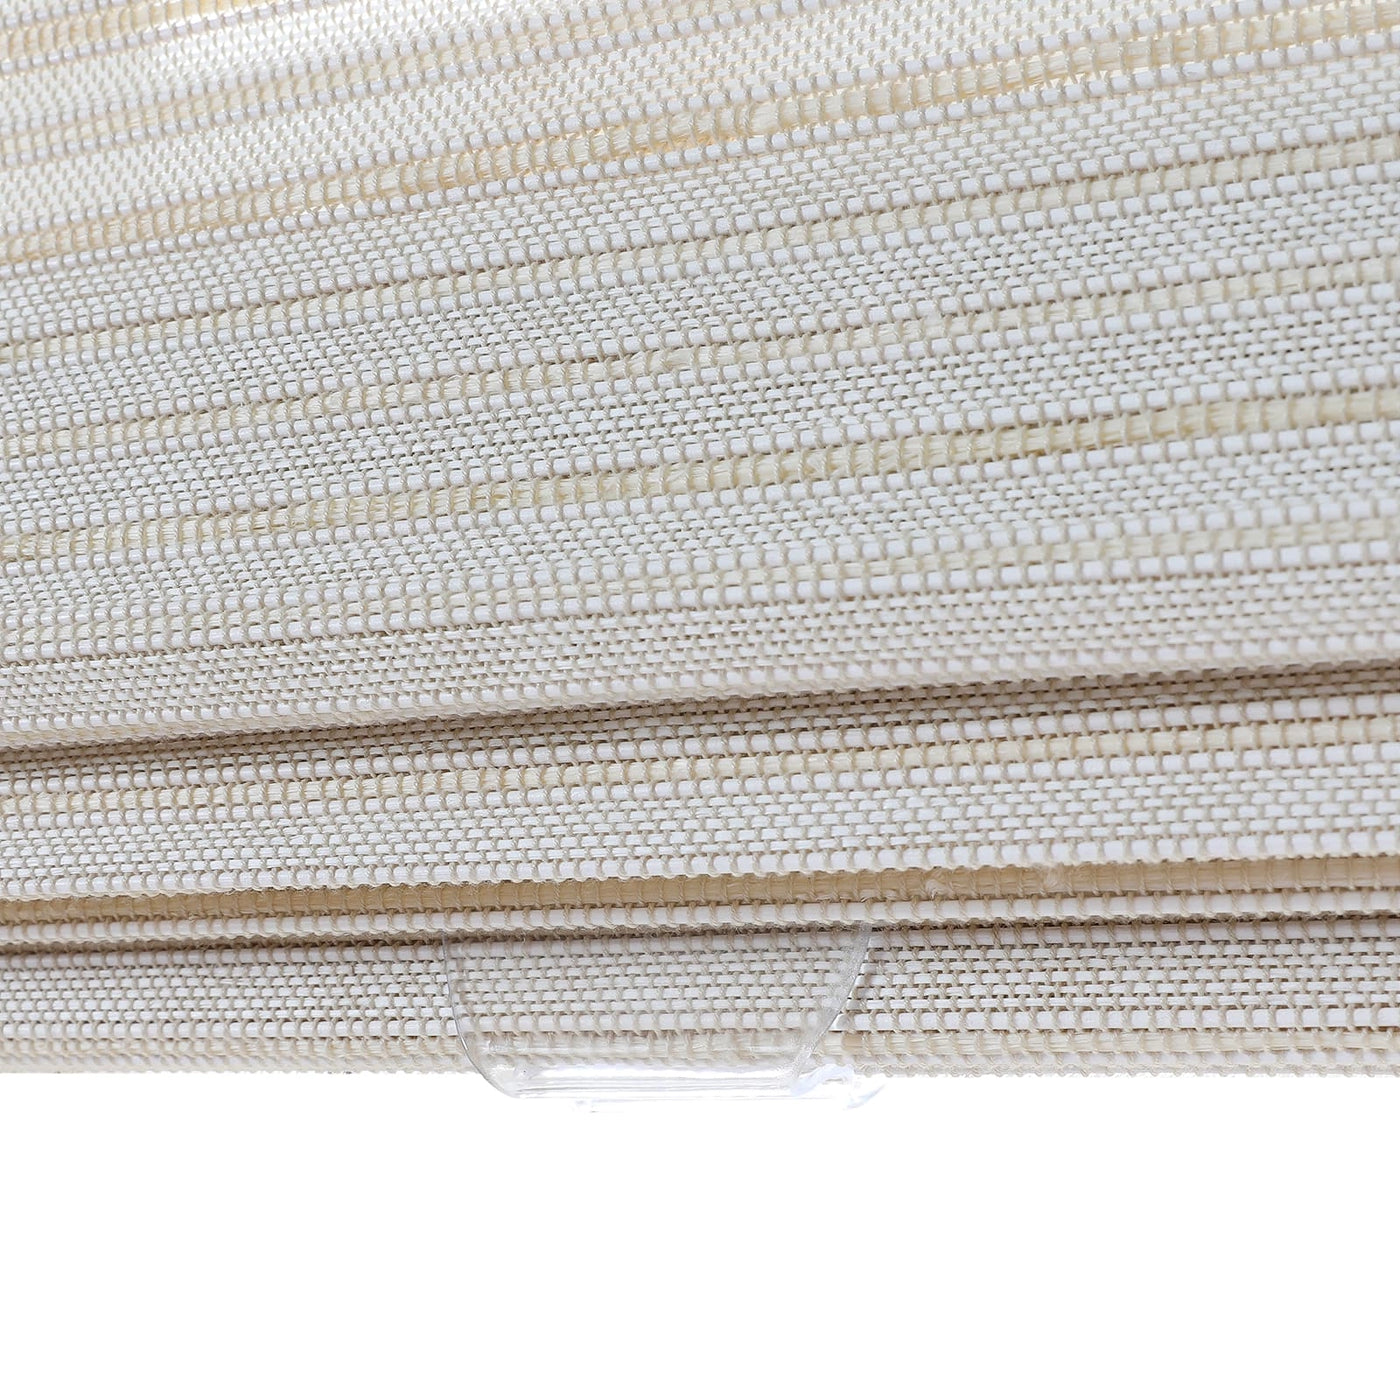 Natural Paper Bamboo Woven Shade - Marble White